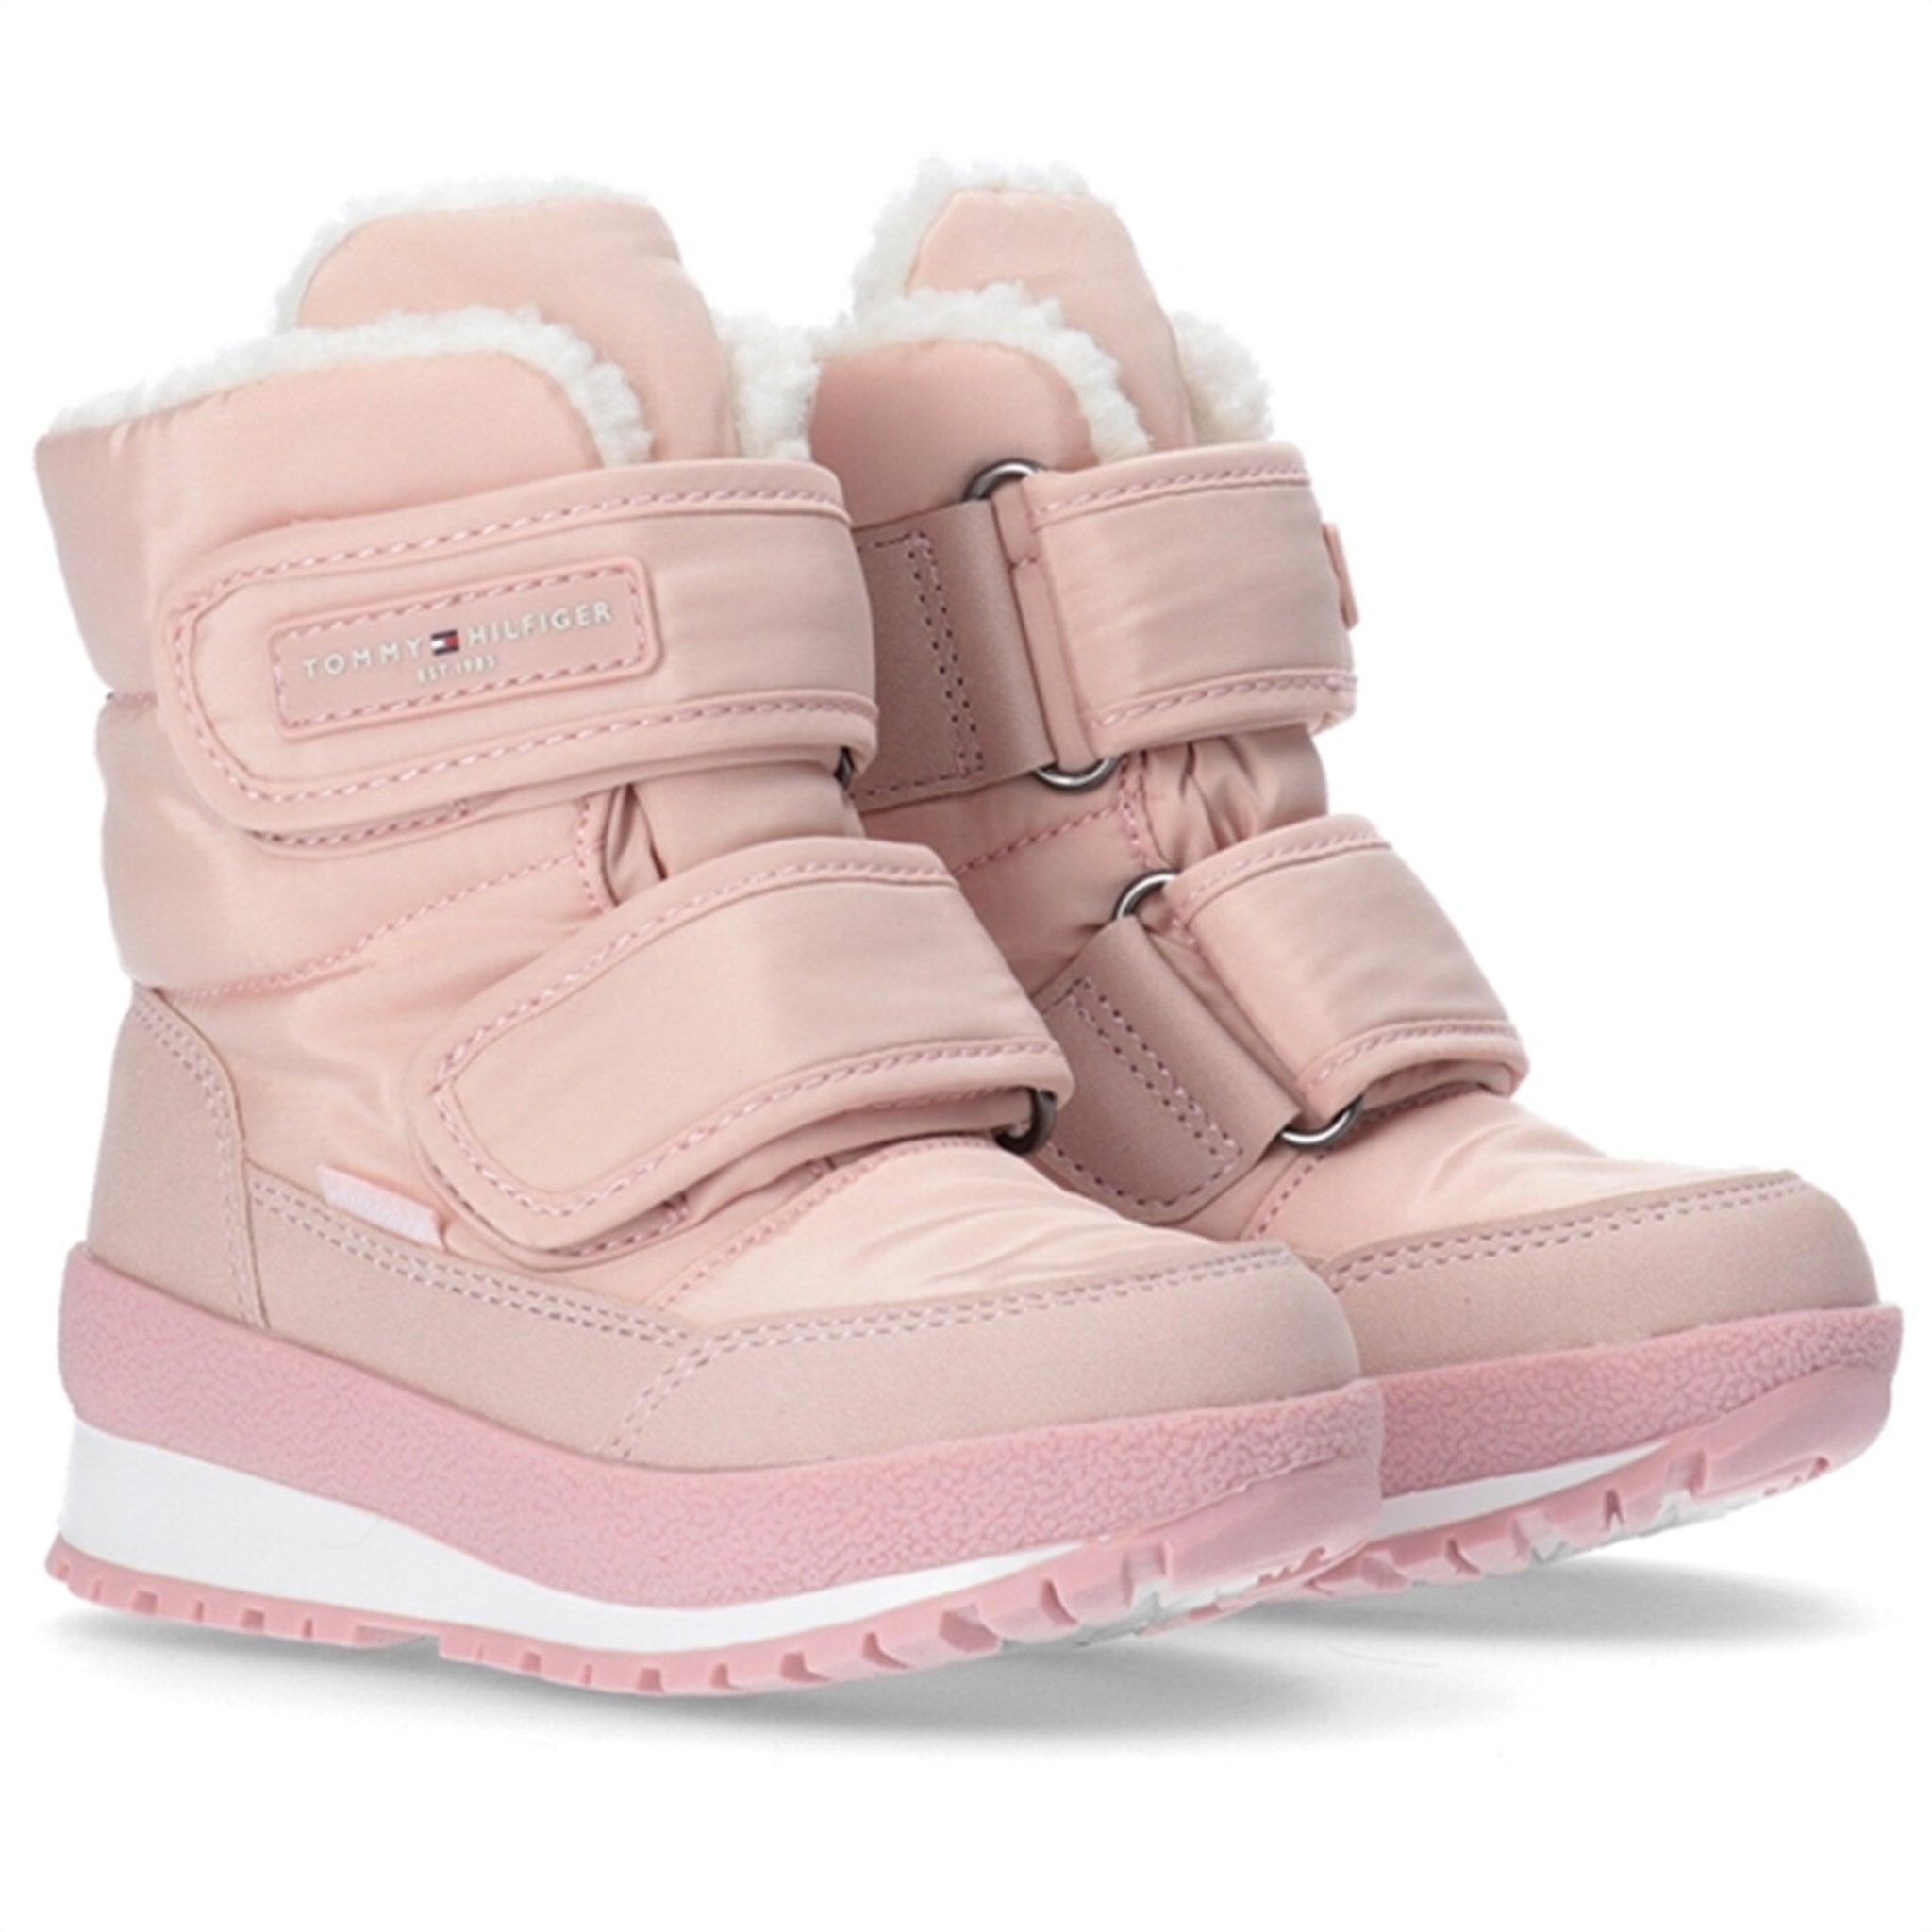 Tommy Hilfiger Snow Boot Pink